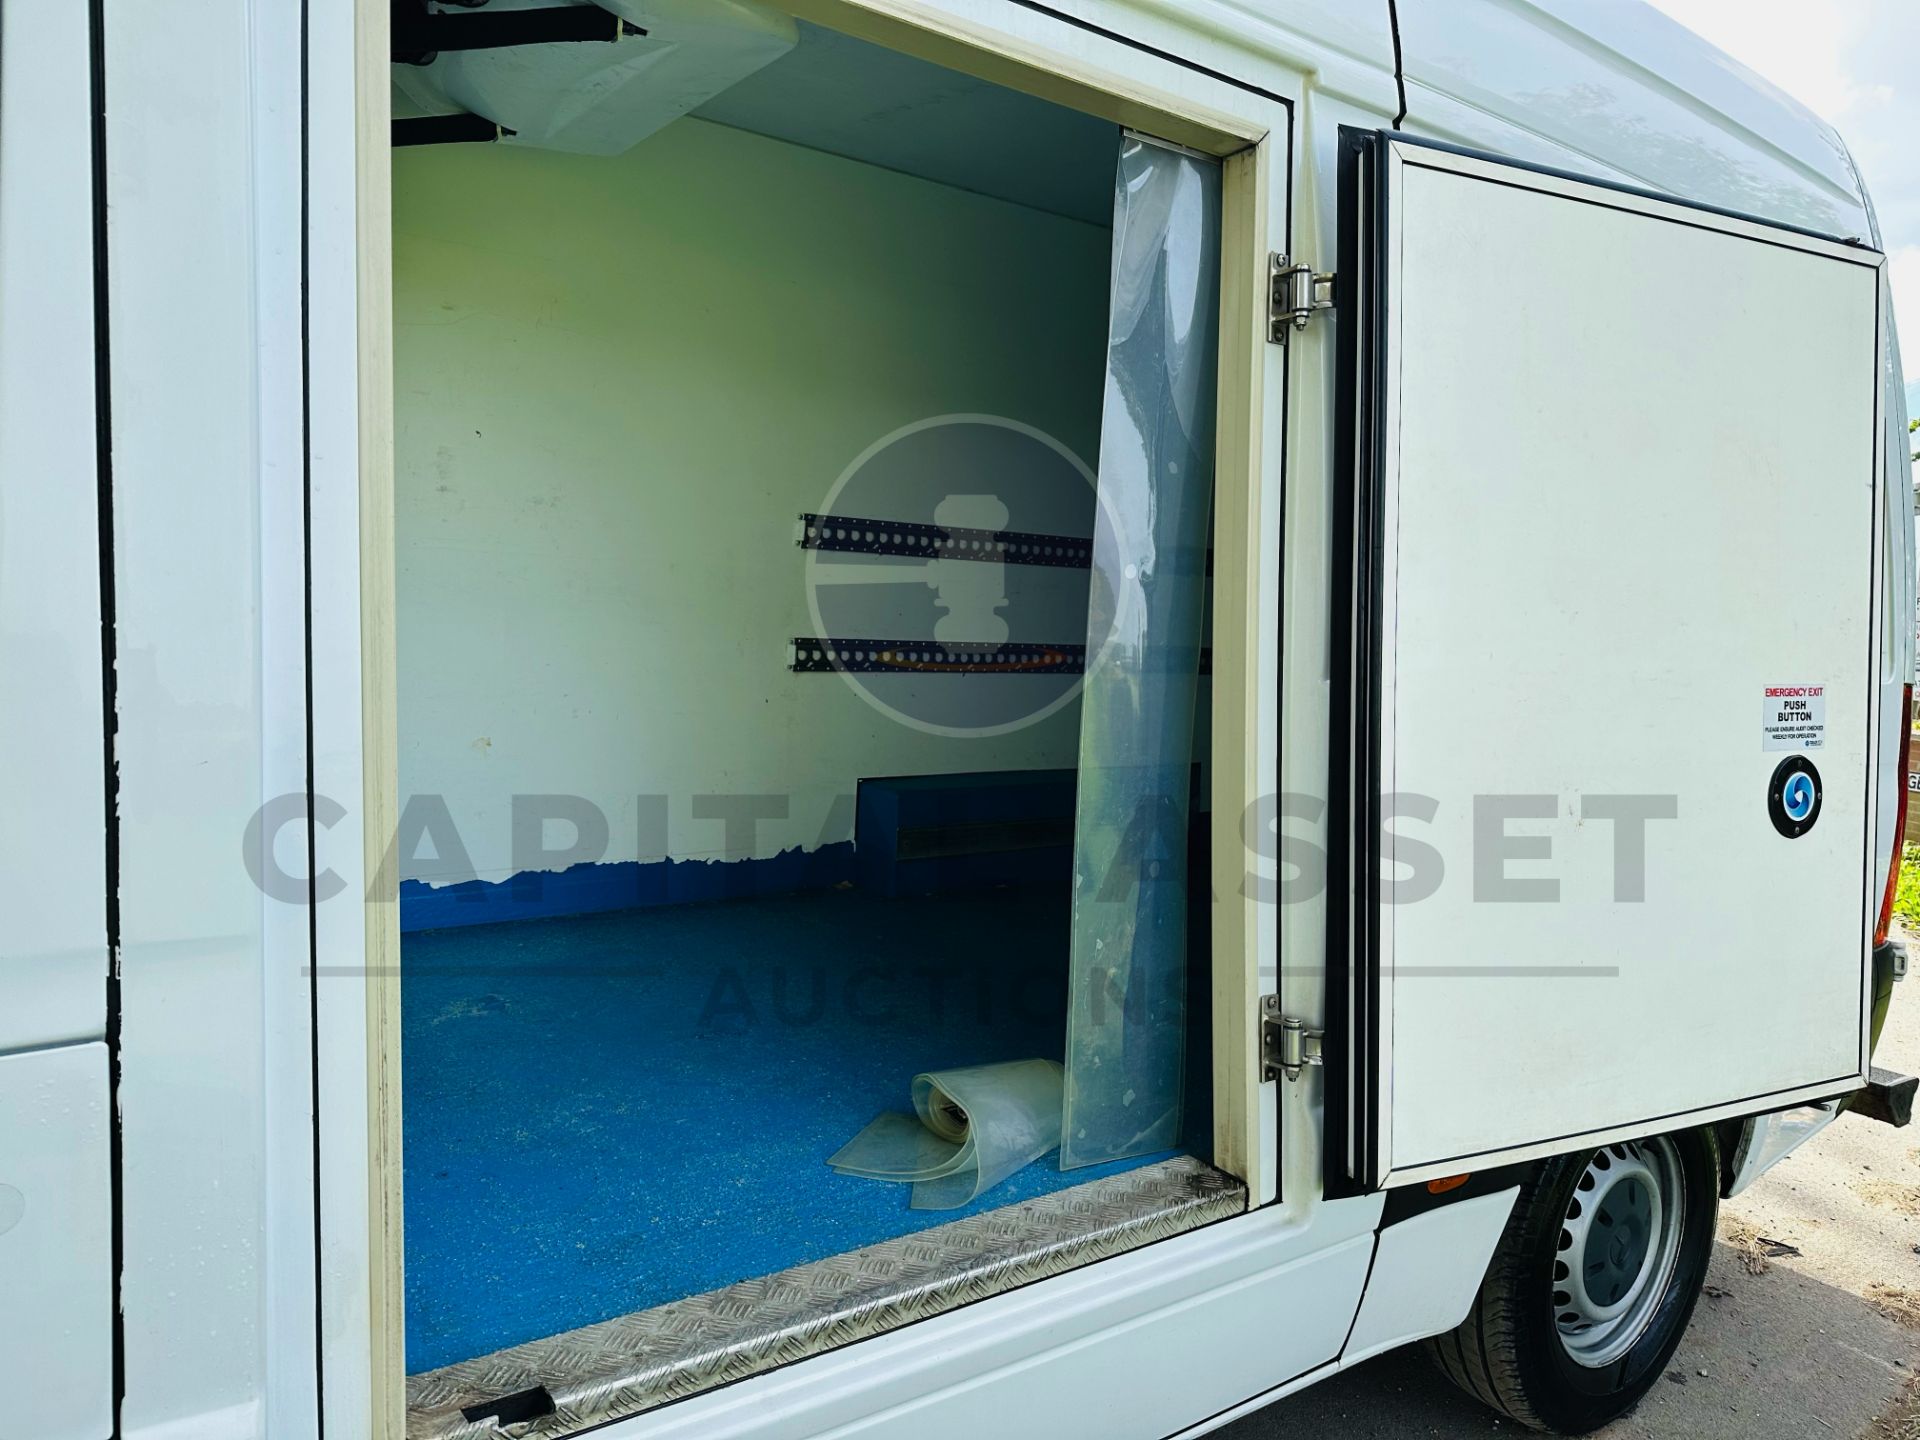 MERCEDES-BENZ SPRINTER 314 CDI *MWB - REFRIGERATED VAN* (2019 - FACELIFT MODEL) *OVERNIGHT STANDBY* - Image 20 of 44